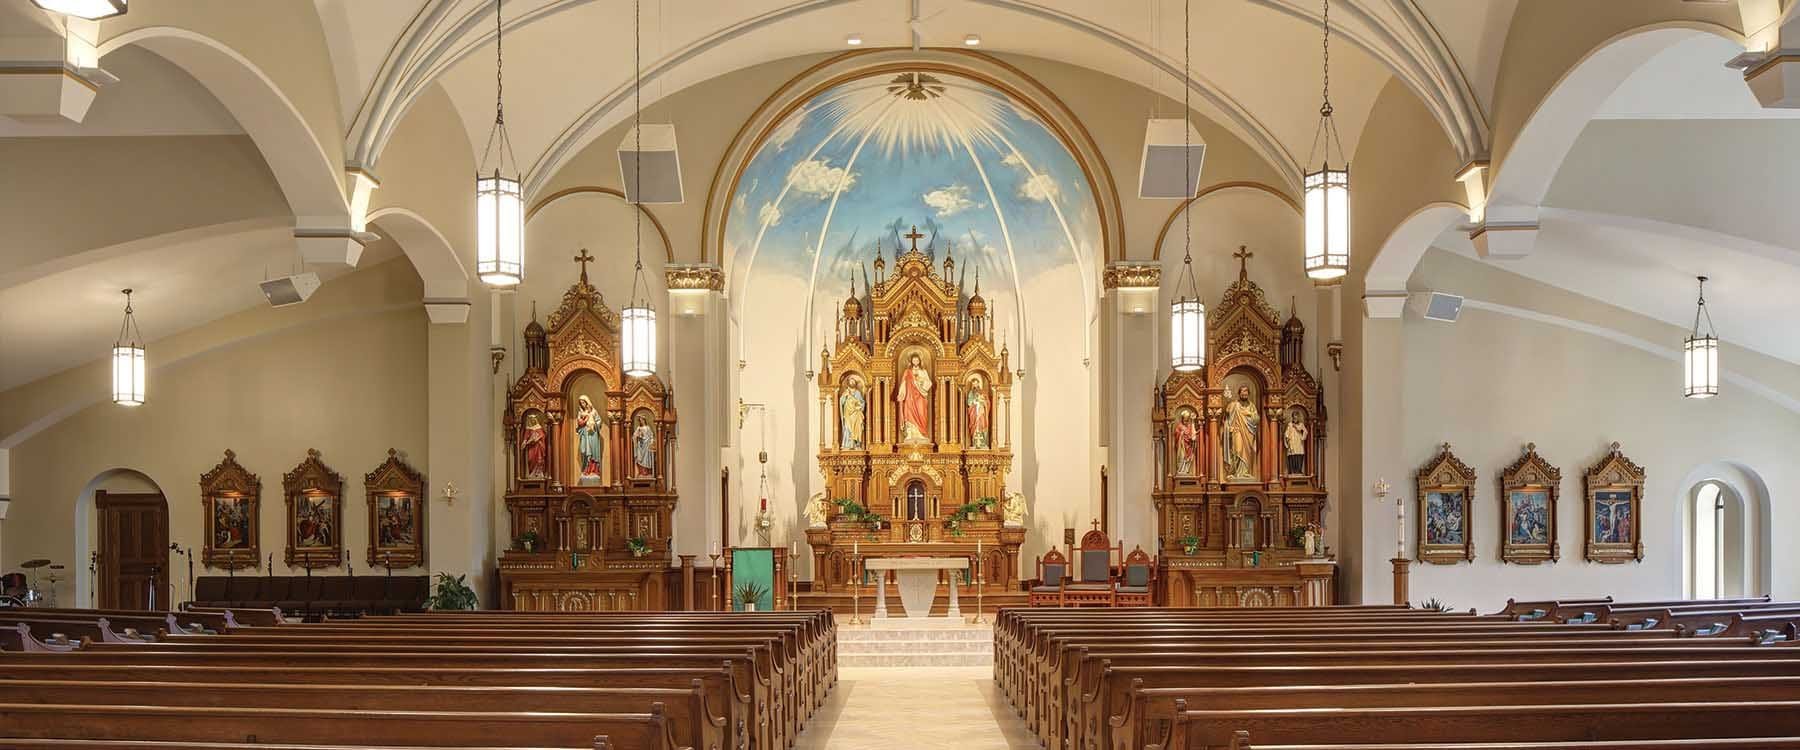 The Sanctuary of St. Peter Catholic Church Slinger Wisconsin, looking towards the Altar